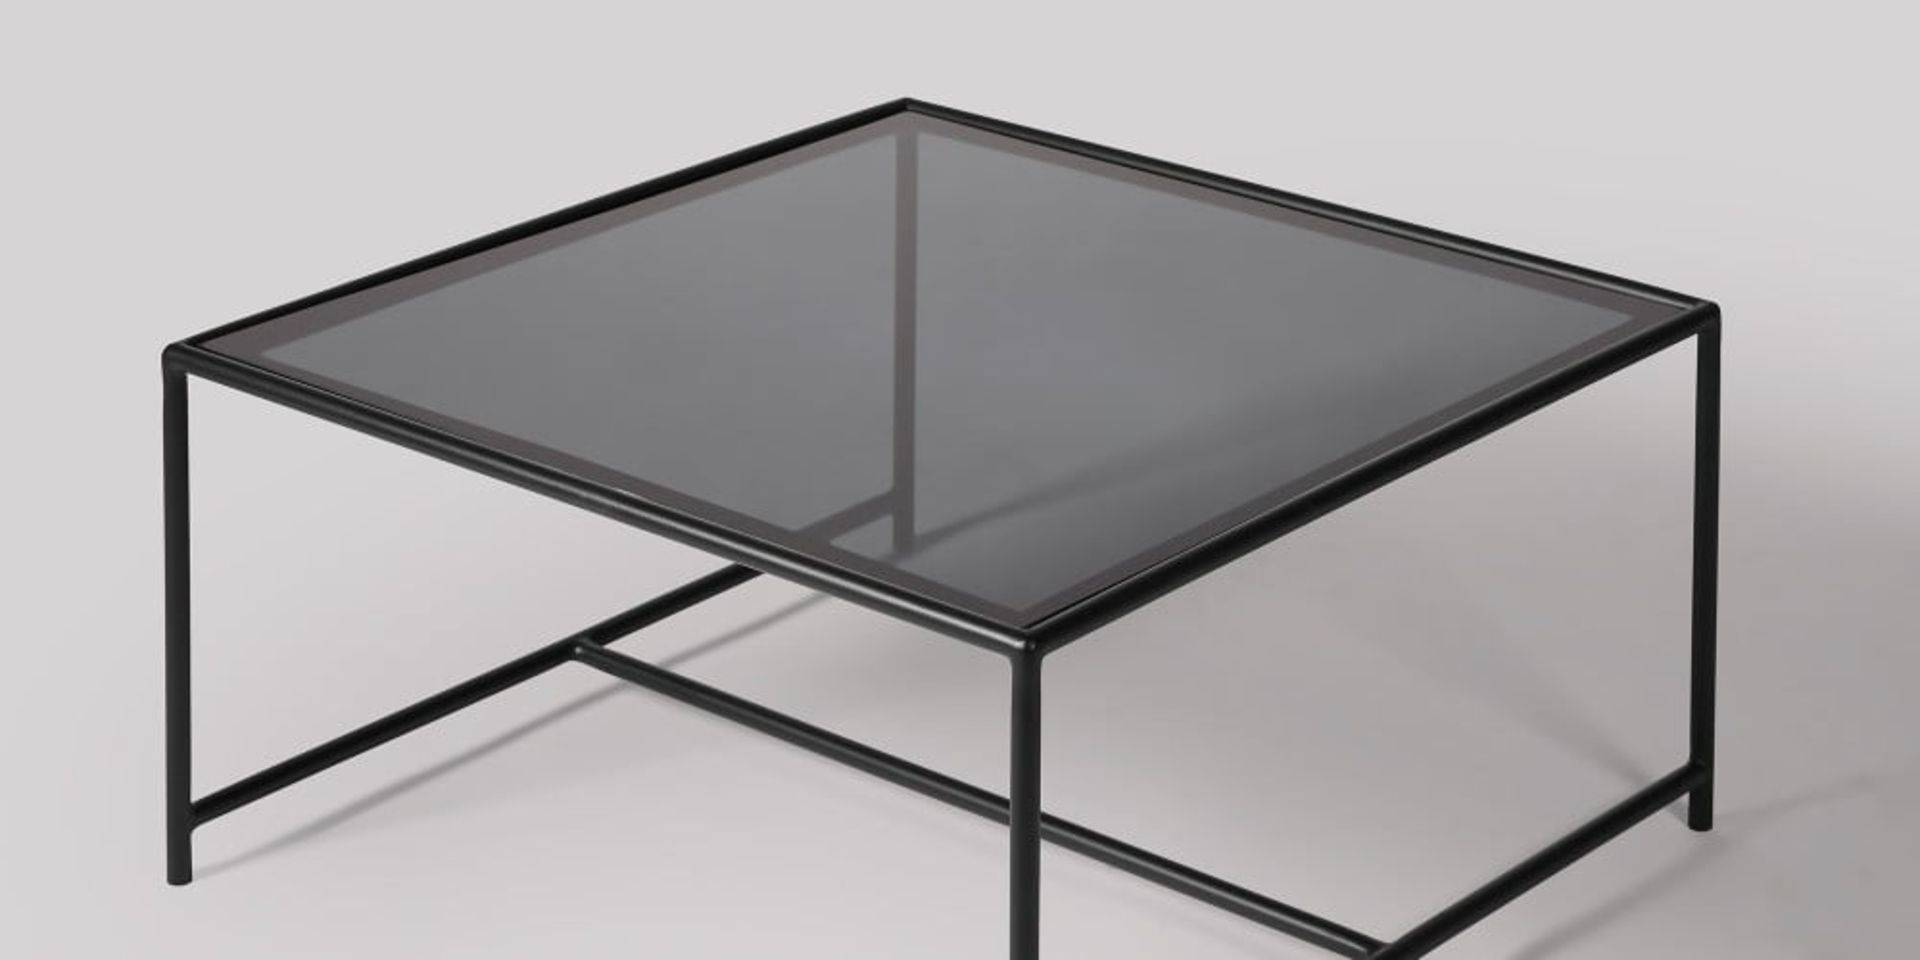 Kennington Garden Table, Black Steel & Black Glass By Swoon Editions (brand new boxed) Perfectly